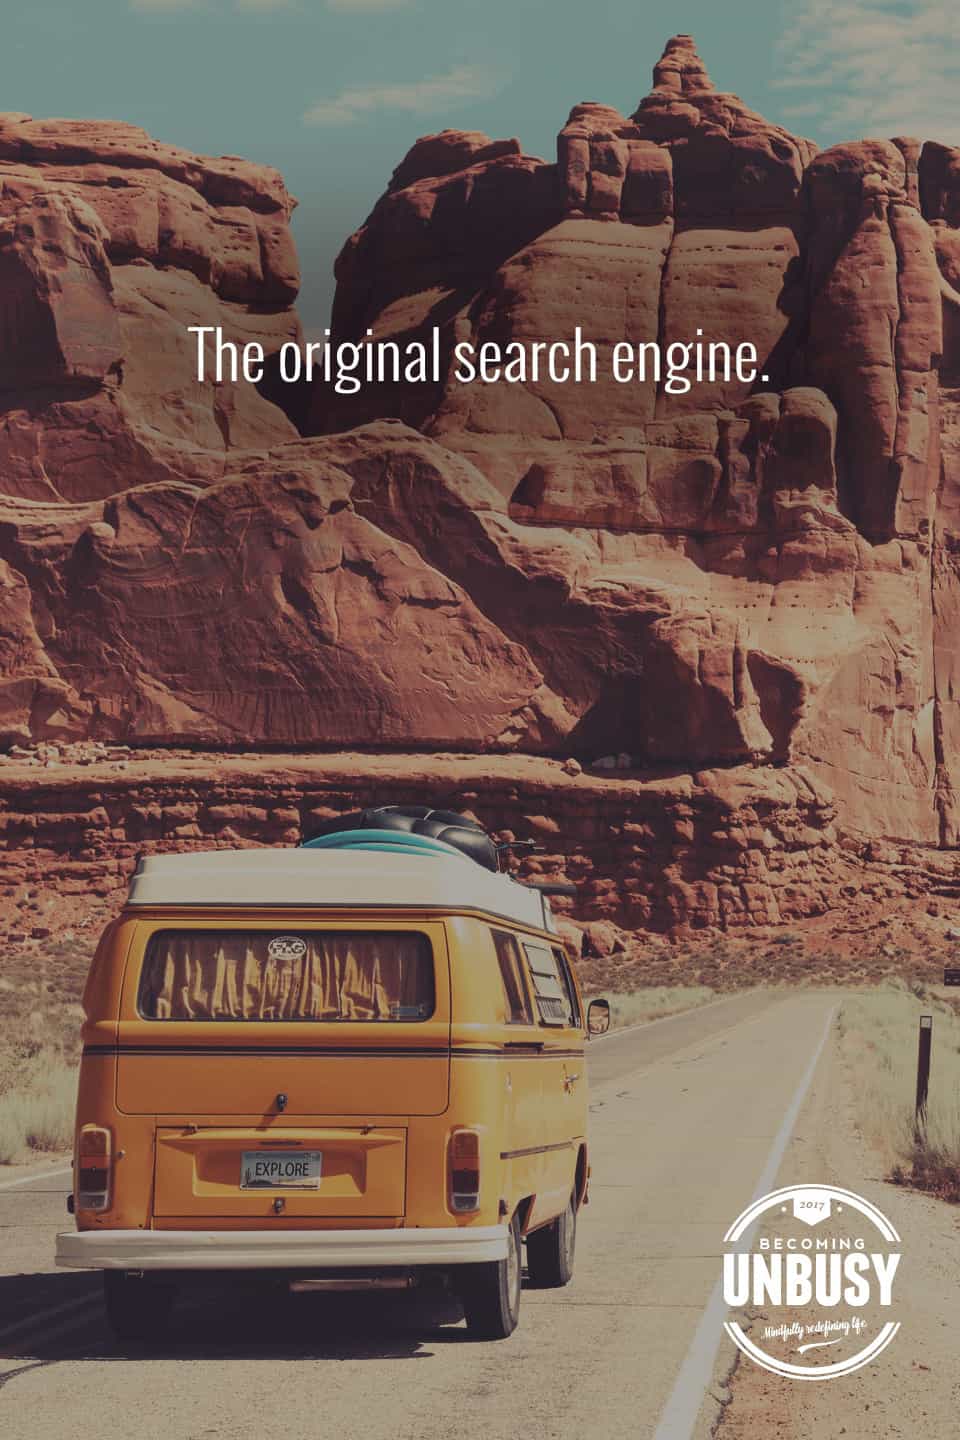 the original search engine. *loved this post about a family who travels together for an entire year. fascinating takeaways.